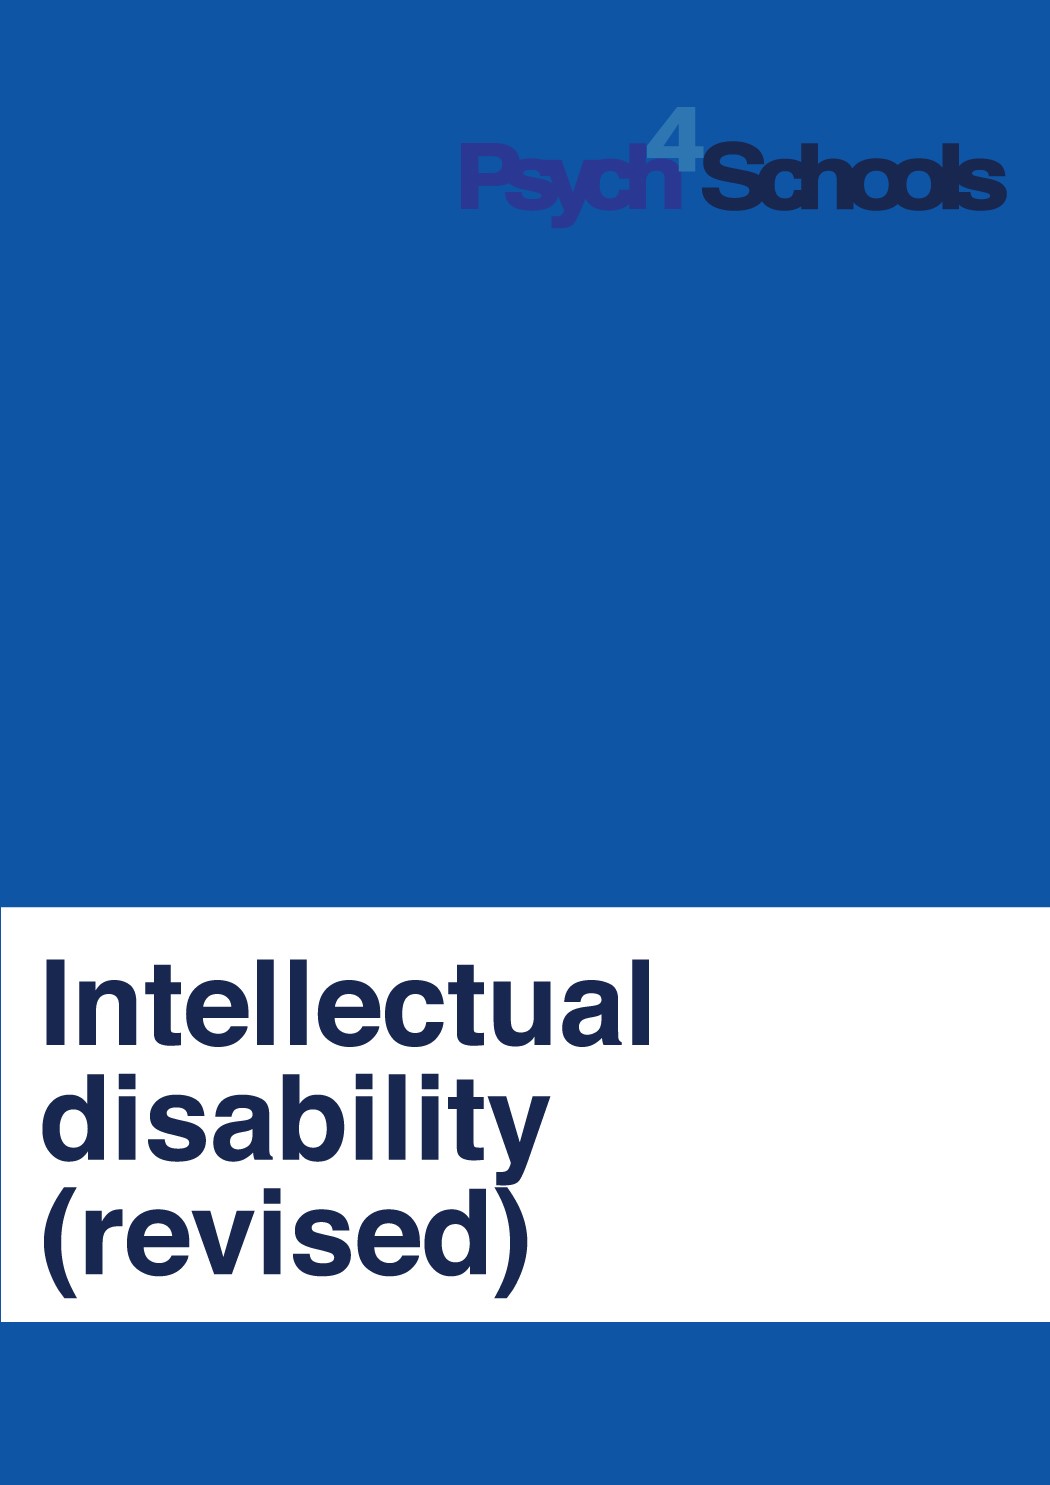 New release: Updated Intellectual Disability (revised) ebooklet